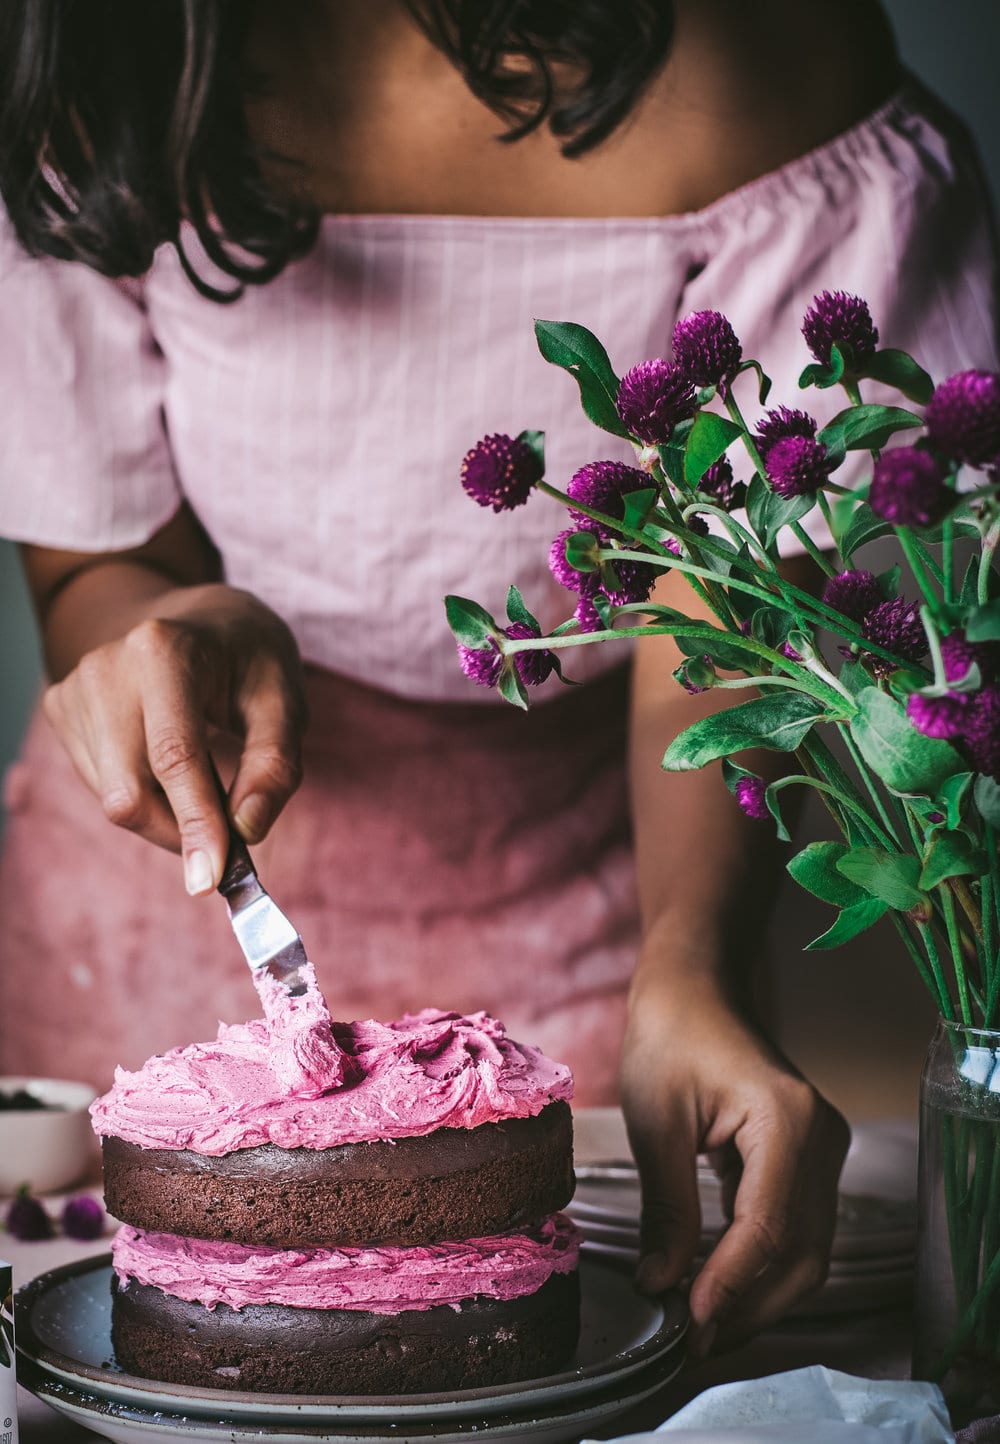 Woman smoothing hibiscus frosting onto chocolate layer cake.